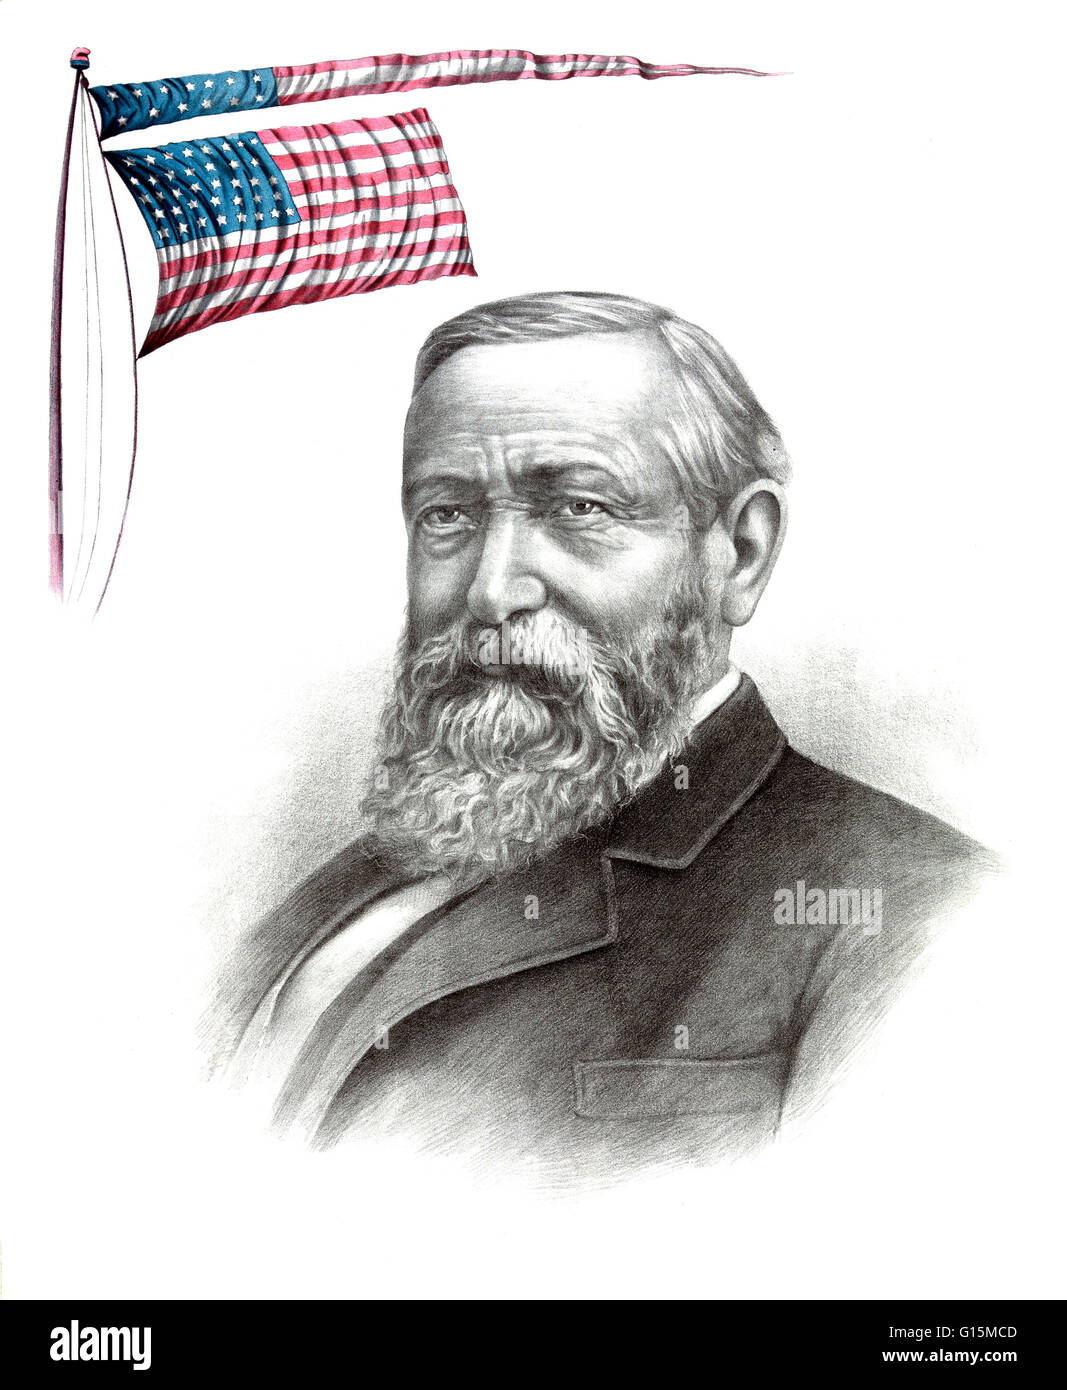 Lithograph entitled: Benjamin Harrison, Republican candidate for president. Benjamin Harrison (August 20, 1833 - March 13, 1901) was the 23rd President of the United States (1889-1893). During the American Civil War, he served the Union as a Brigadier Gen Stock Photo